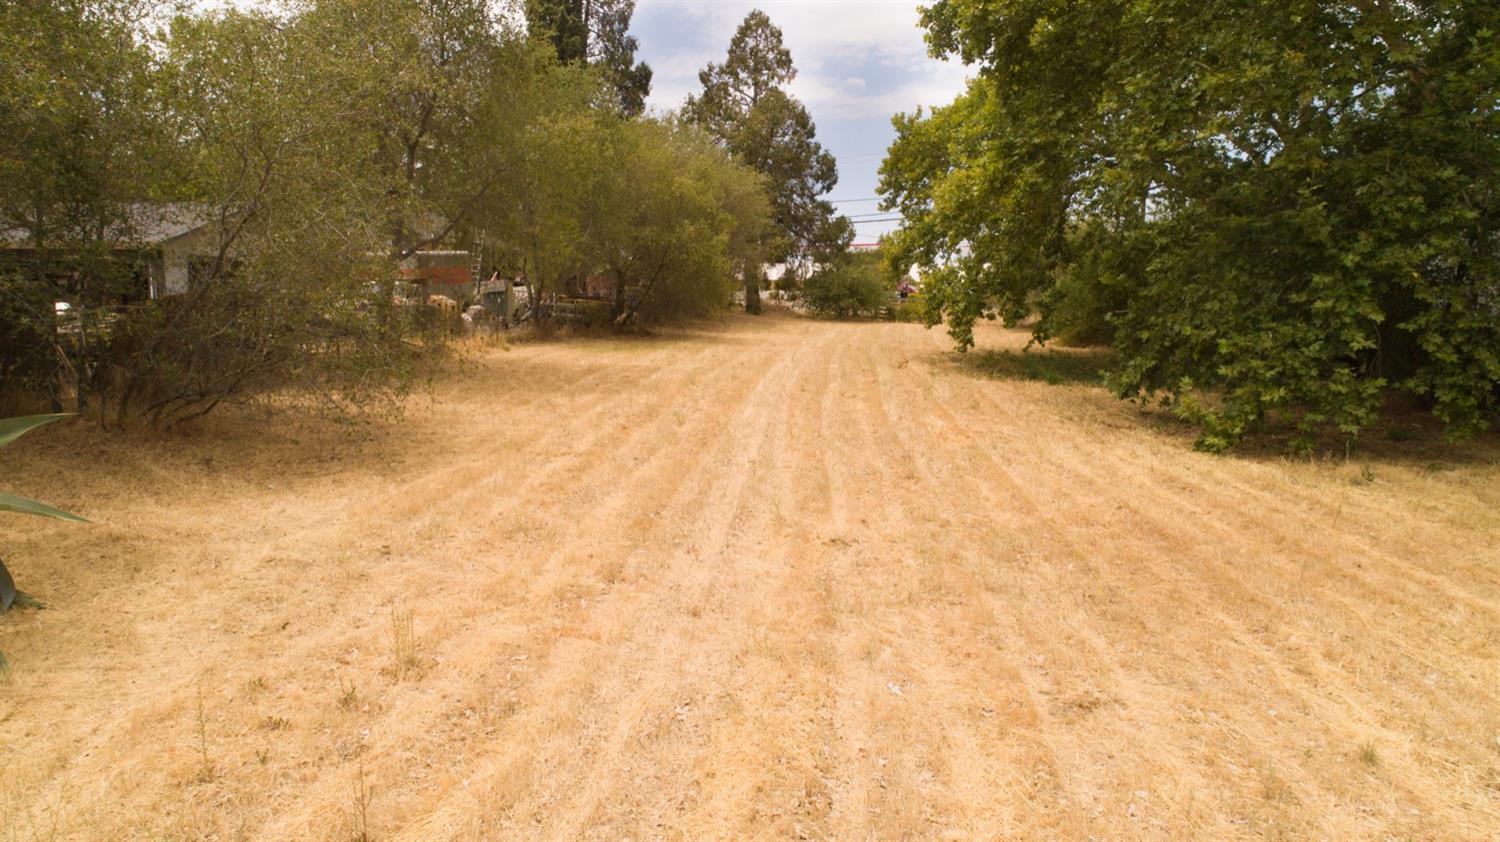 Photo of Taylor Rd in Loomis, CA